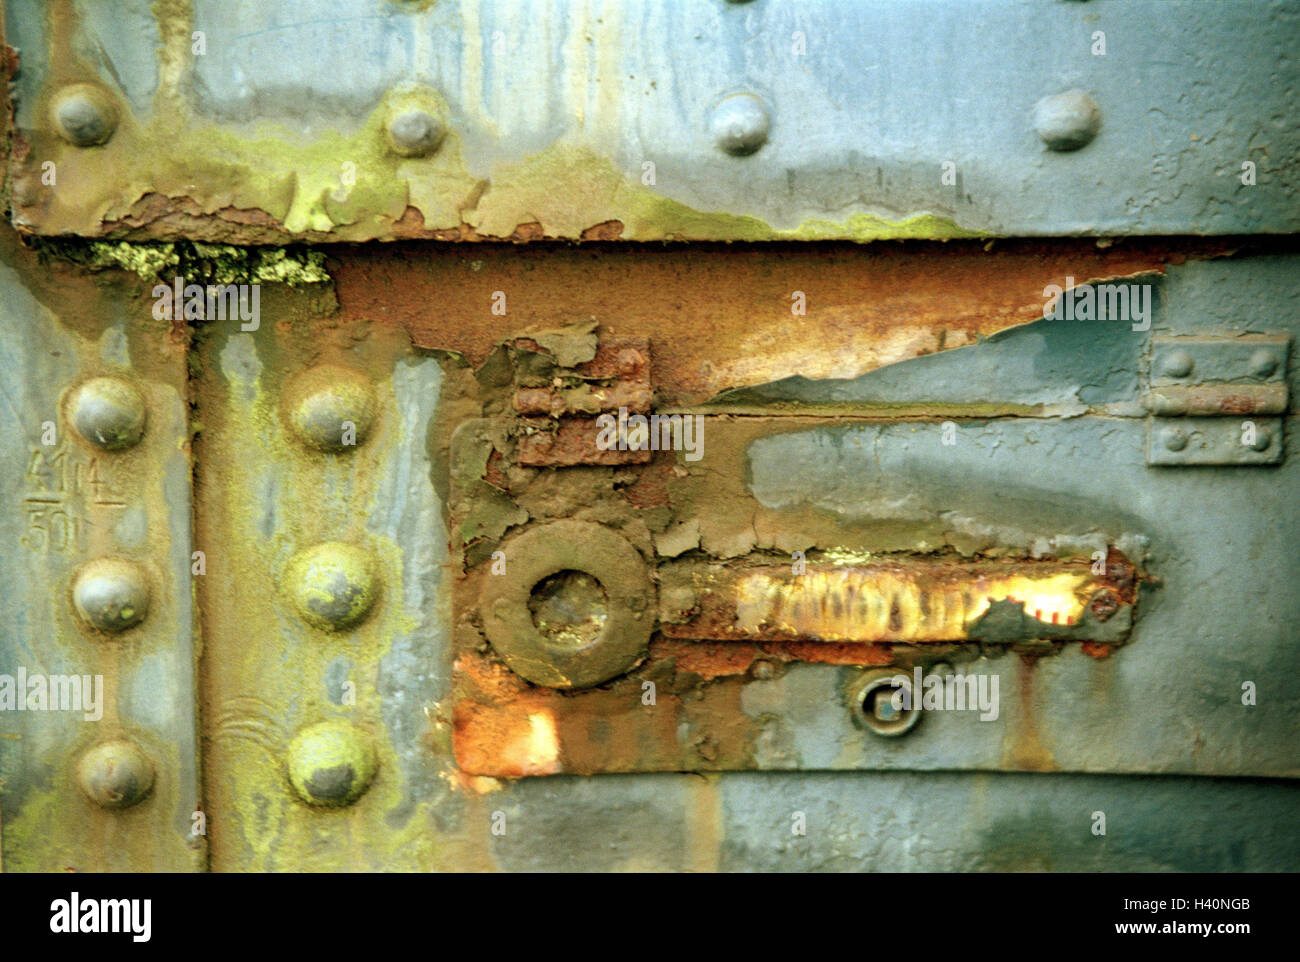 Good carriage, rivets, rust, close up, train, train carriage, railway, railway car, goods train, carriage, disused, old, uses, discards, colour, varnish, peel off, weather-beaten, rust, corrosion, transitoriness, Still life, detail Stock Photo